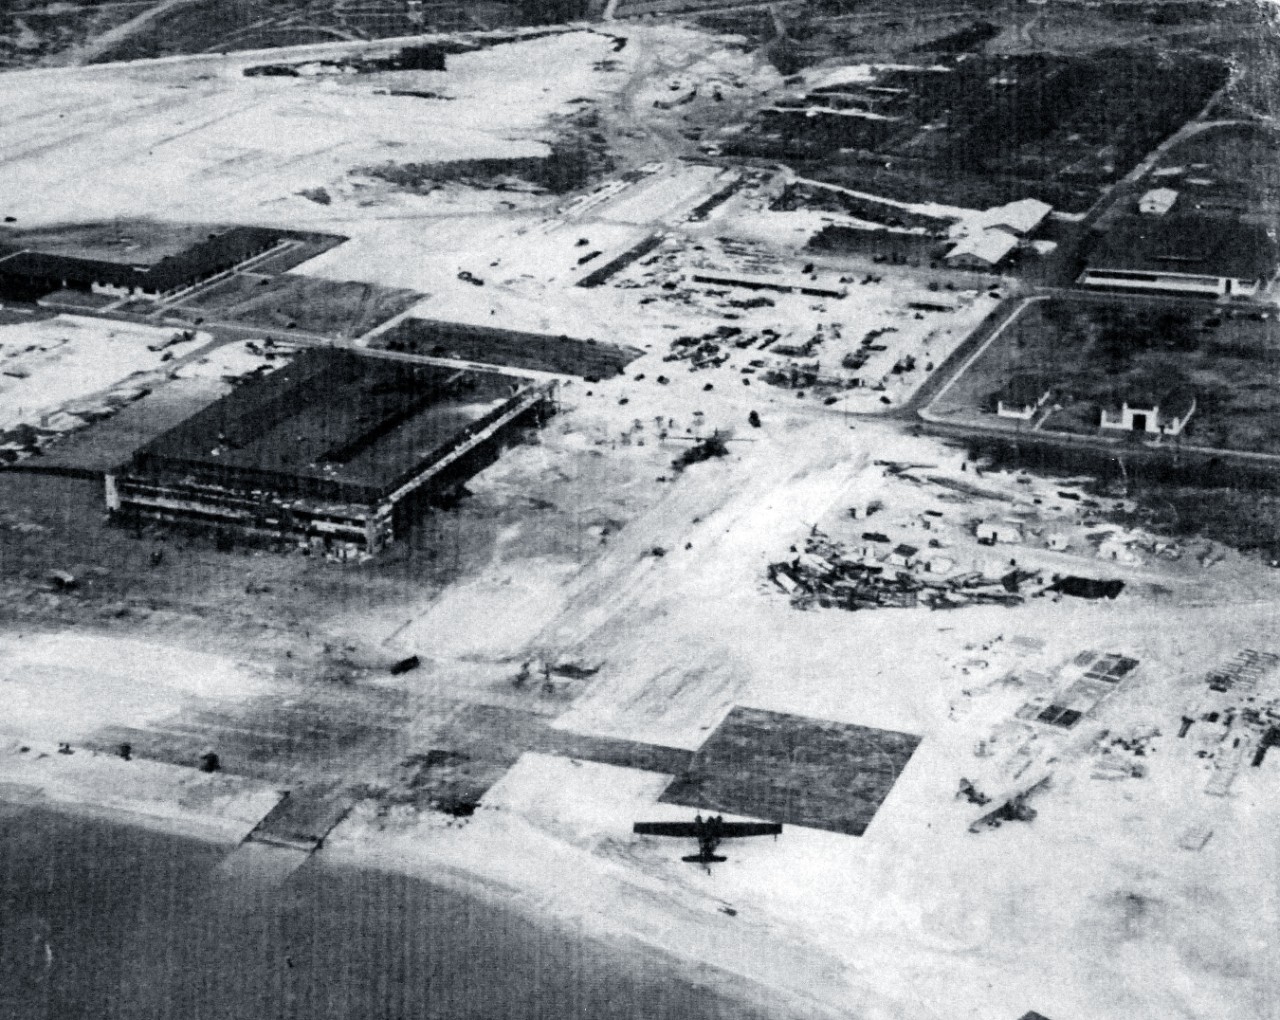 80-G-32866:   Half-tone image of a photograph, Japanese Attack on Pearl Harbor, December 7, 1941.  Hangar area at Naval Air Station, Kaneohe Bay, Territory of Hawaii, showing damage wrought by Japanese bombing.  Aerial view looks Northwest at an altitude of 700 feet.  (8/25/2015).